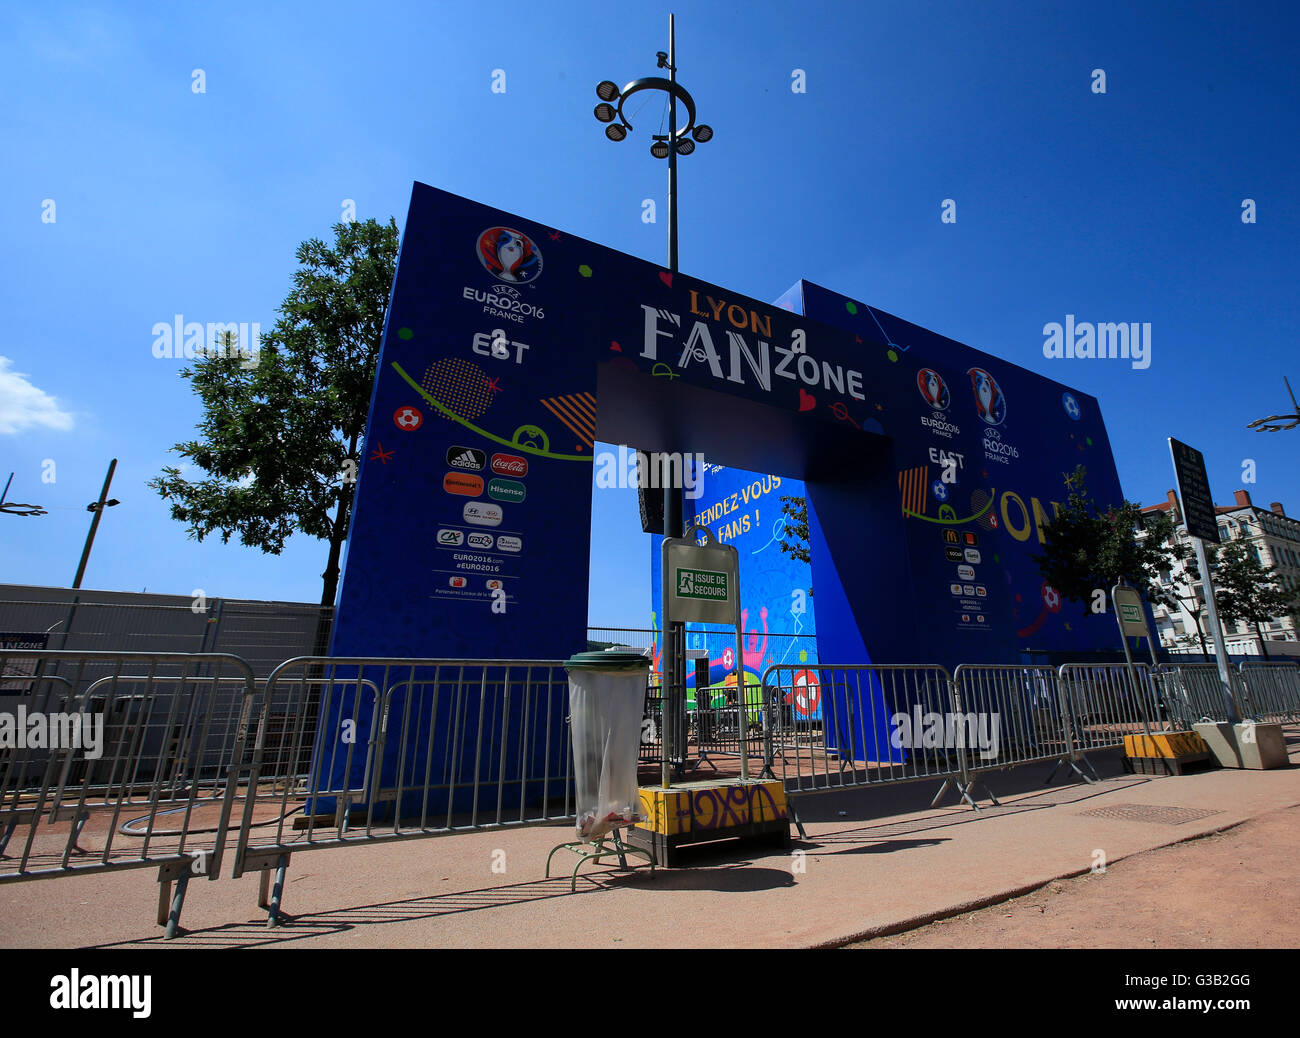 Entrance to the fan zone in Place Bellecour, Lyon, France. PRESS ASSOCIATION Photo. Picture date: Thursday June 9, 2016. Photo credit should read: Jonathan Brady/PA Wire Stock Photo